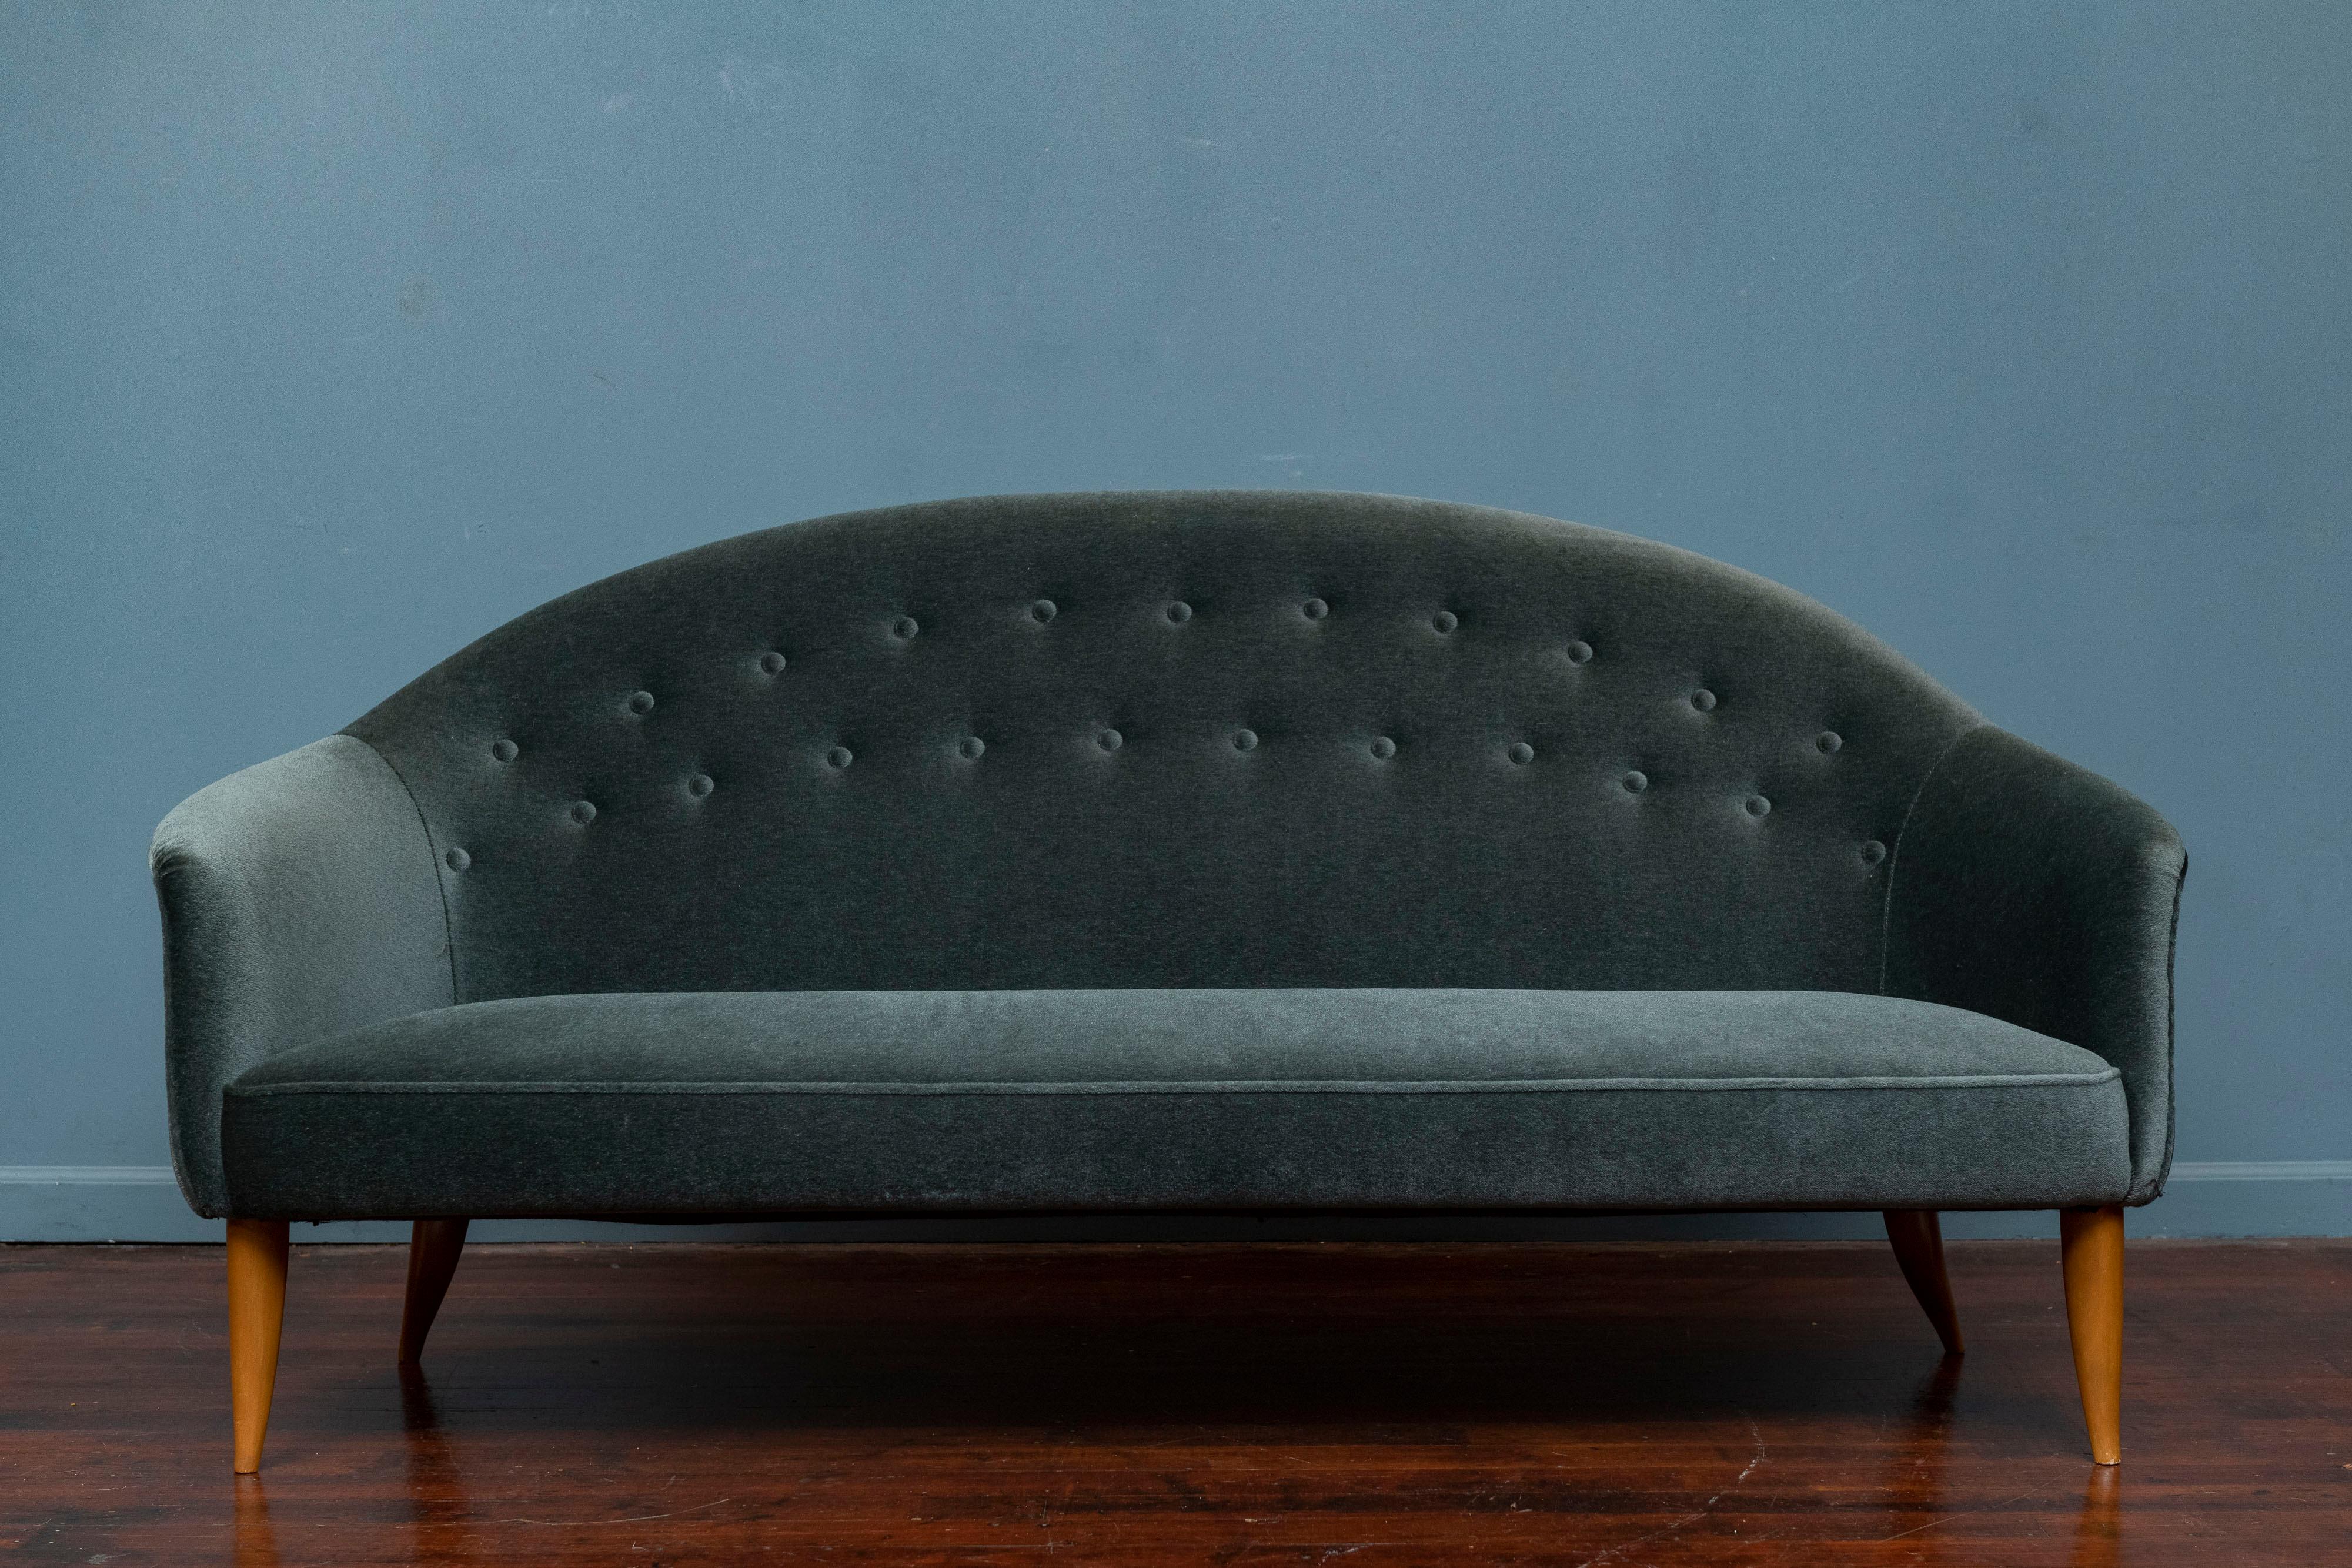 Kerstin Horlin Holmquist design Paridiset sofa, newer dark teal mohair upholstery, very comfy and ready to install.